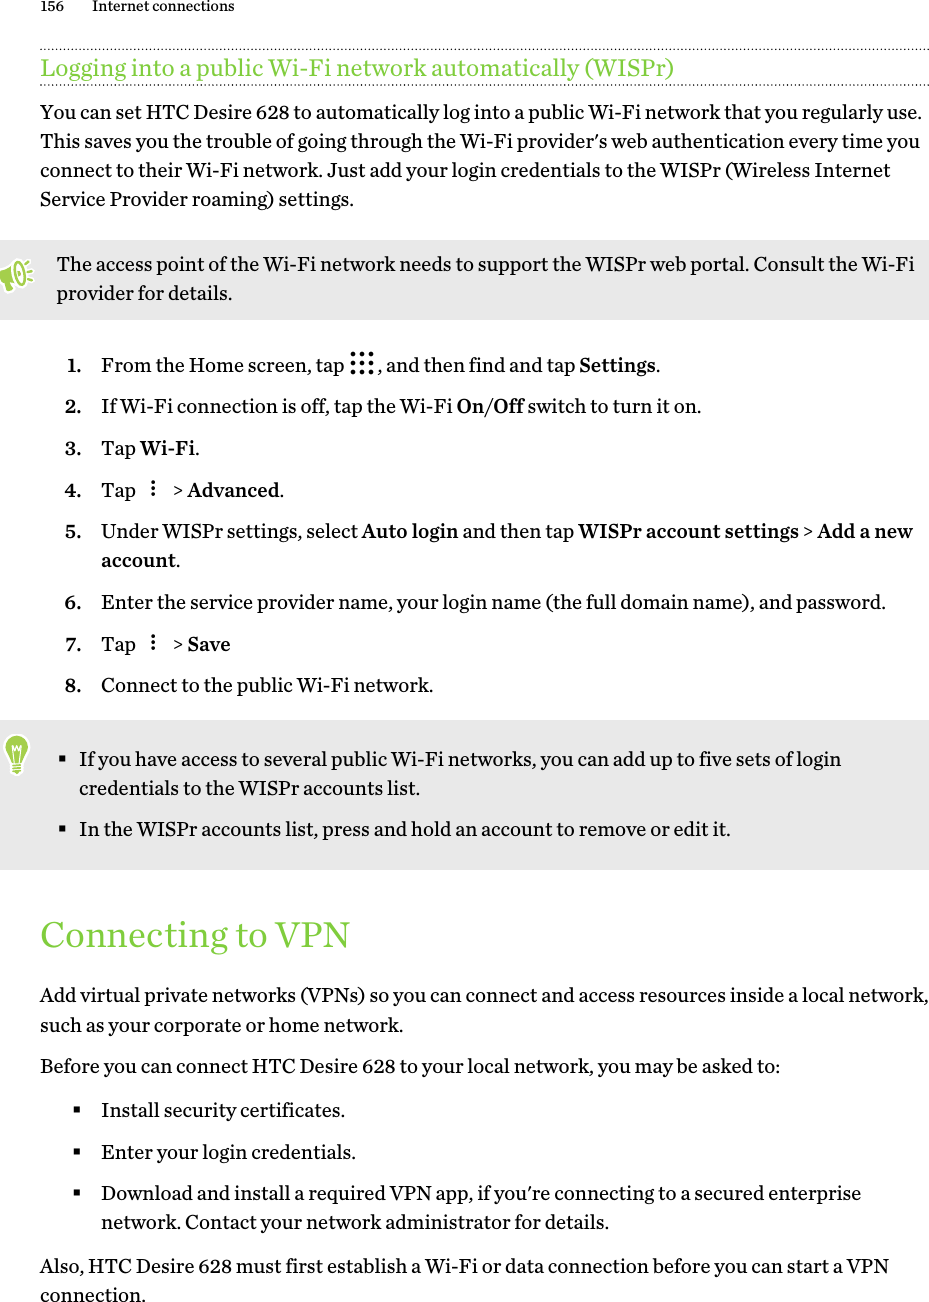 Logging into a public Wi-Fi network automatically (WISPr)You can set HTC Desire 628 to automatically log into a public Wi-Fi network that you regularly use.This saves you the trouble of going through the Wi-Fi provider&apos;s web authentication every time youconnect to their Wi-Fi network. Just add your login credentials to the WISPr (Wireless InternetService Provider roaming) settings.The access point of the Wi-Fi network needs to support the WISPr web portal. Consult the Wi-Fiprovider for details.1. From the Home screen, tap  , and then find and tap Settings.2. If Wi-Fi connection is off, tap the Wi-Fi On/Off switch to turn it on.3. Tap Wi-Fi.4. Tap   &gt; Advanced.5. Under WISPr settings, select Auto login and then tap WISPr account settings &gt; Add a newaccount.6. Enter the service provider name, your login name (the full domain name), and password.7. Tap   &gt; Save8. Connect to the public Wi-Fi network.§If you have access to several public Wi-Fi networks, you can add up to five sets of logincredentials to the WISPr accounts list.§In the WISPr accounts list, press and hold an account to remove or edit it.Connecting to VPNAdd virtual private networks (VPNs) so you can connect and access resources inside a local network,such as your corporate or home network.Before you can connect HTC Desire 628 to your local network, you may be asked to:§Install security certificates.§Enter your login credentials.§Download and install a required VPN app, if you&apos;re connecting to a secured enterprisenetwork. Contact your network administrator for details.Also, HTC Desire 628 must first establish a Wi-Fi or data connection before you can start a VPNconnection.156 Internet connections